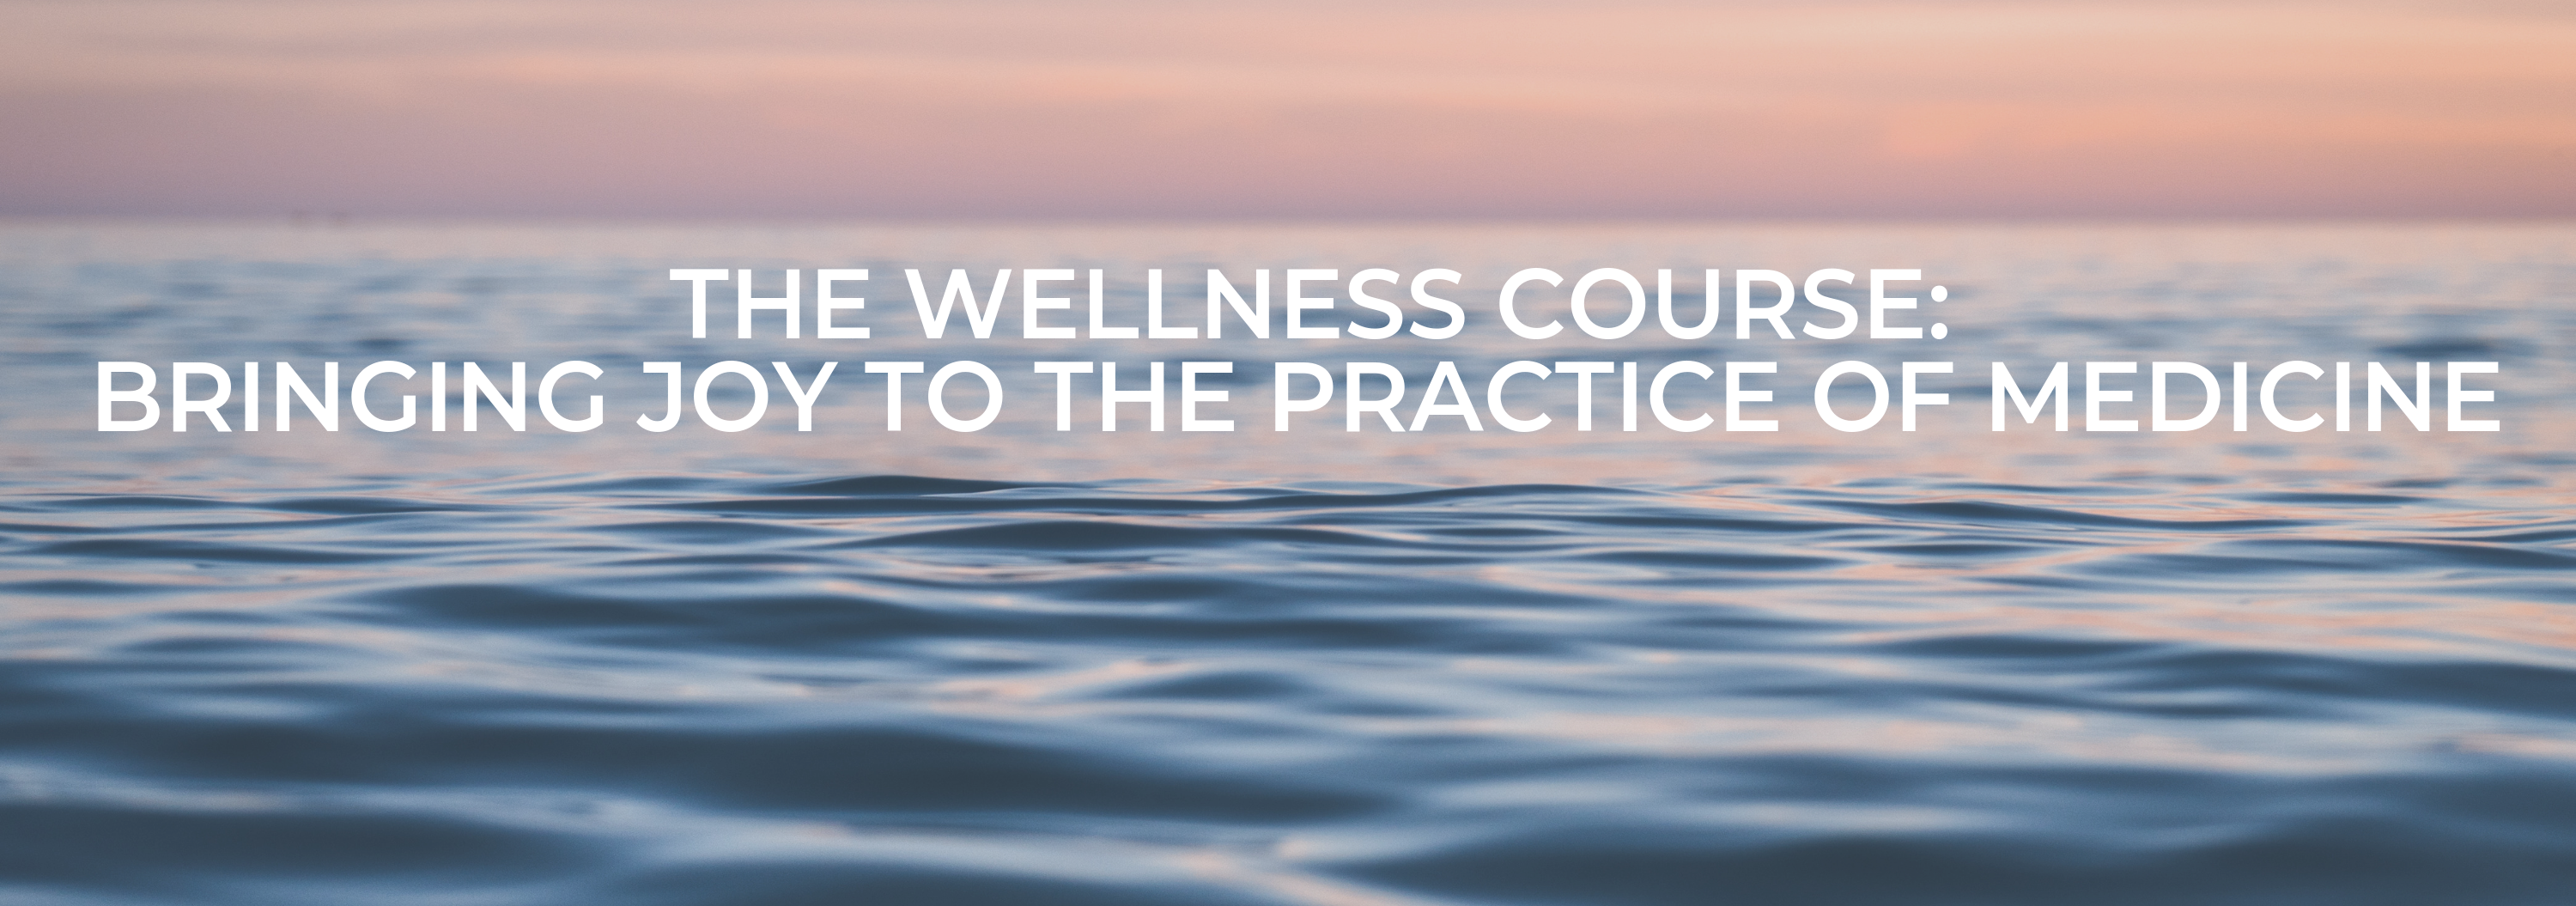 The Wellness Course: Bringing Joy to the Practice of Medicine Banner